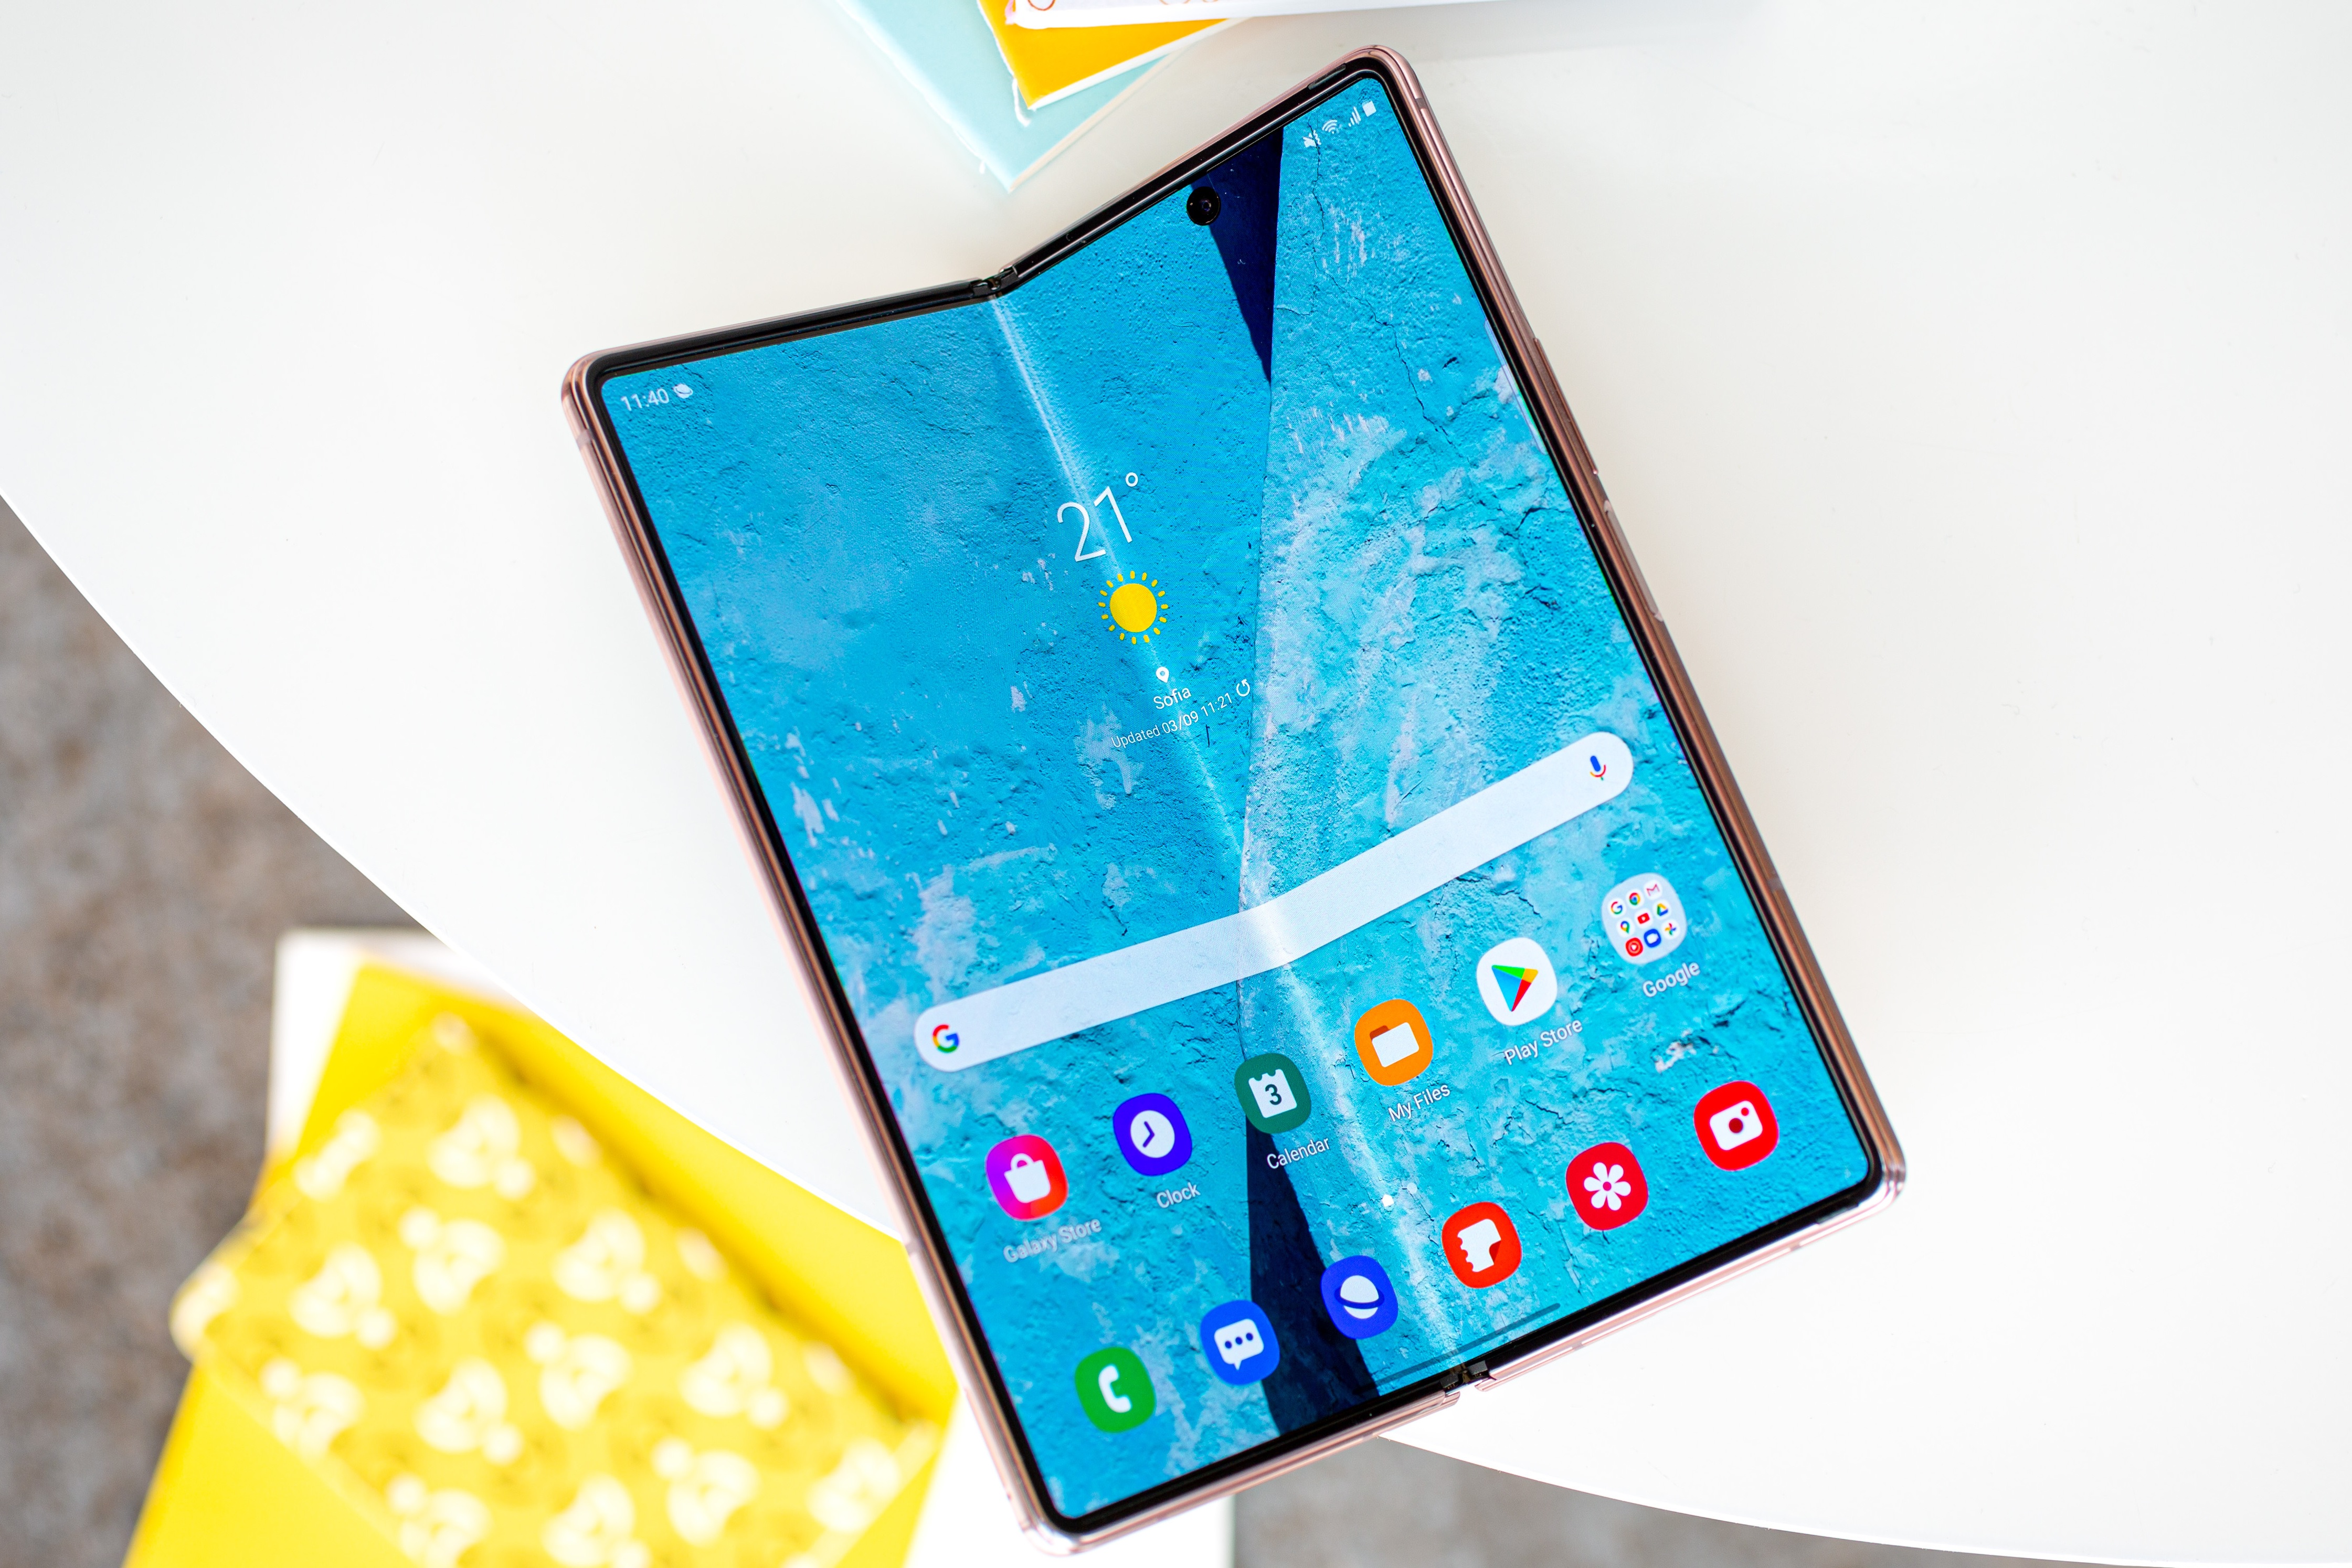 Samsung Galaxy Z Fold2's carrier-locked units get One UI 5.1.1 in the US